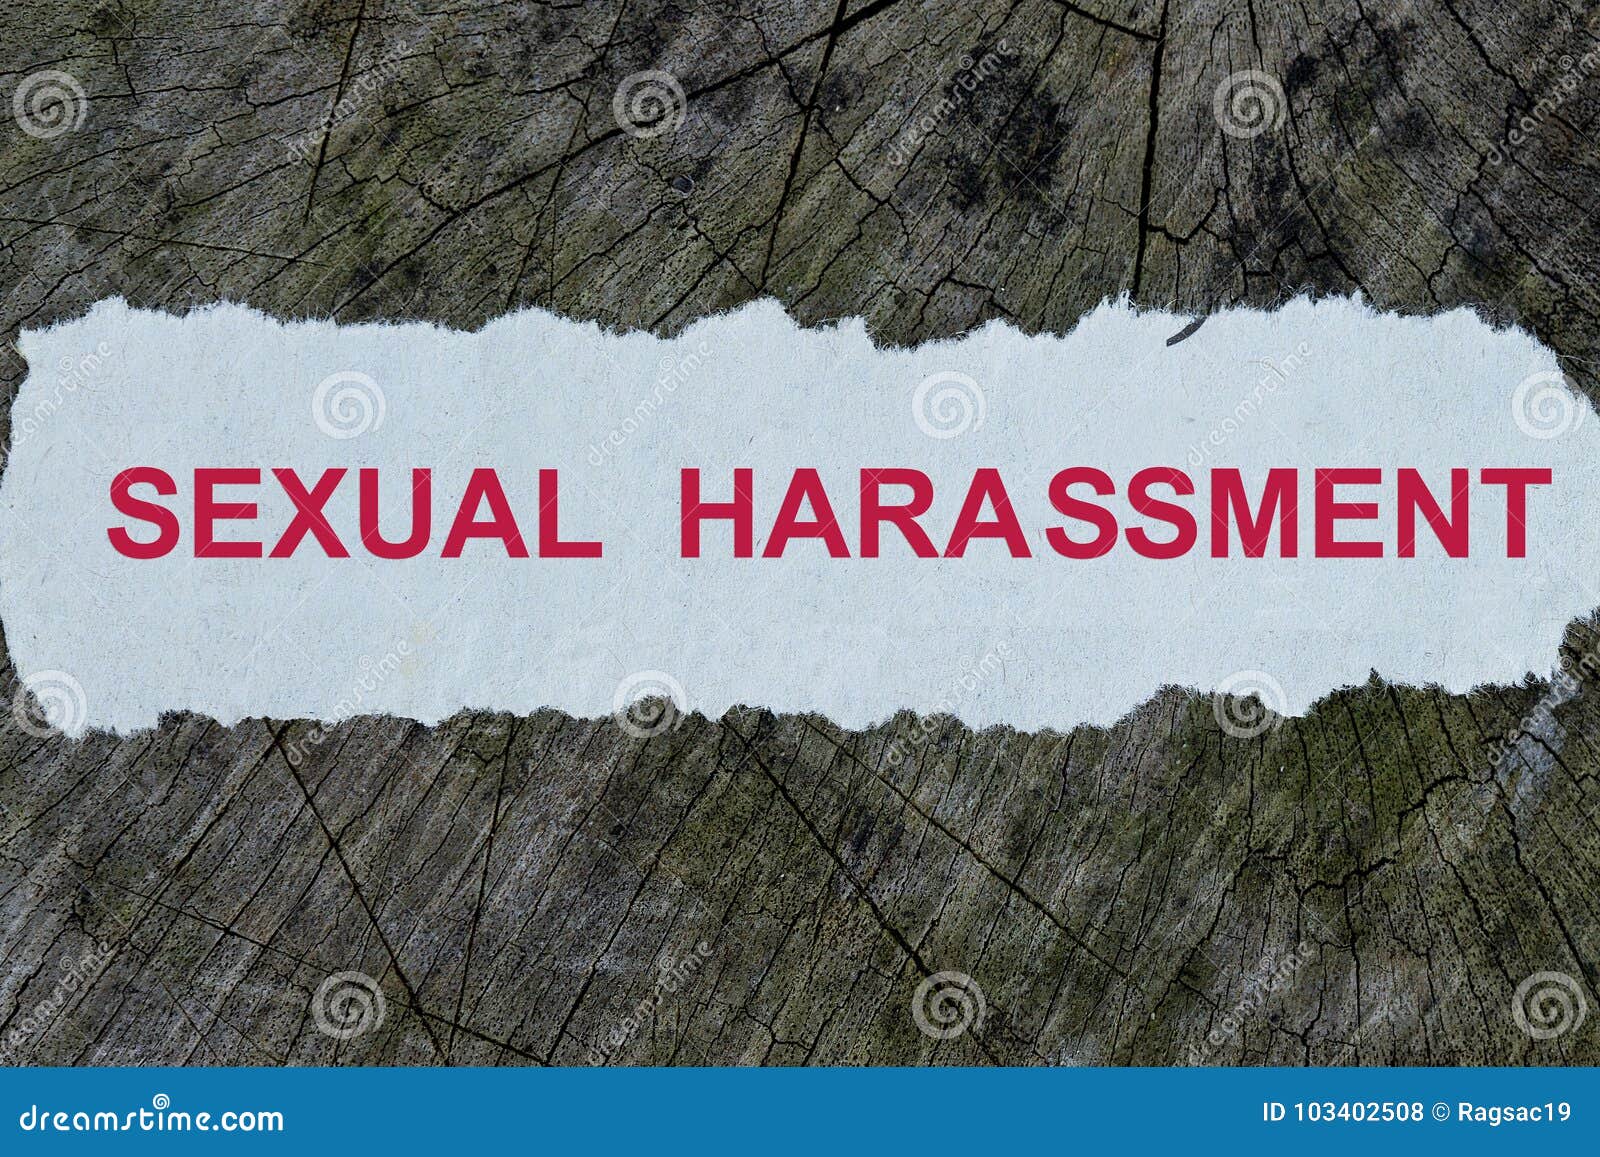 sexual harassment word on a cut out newspaper